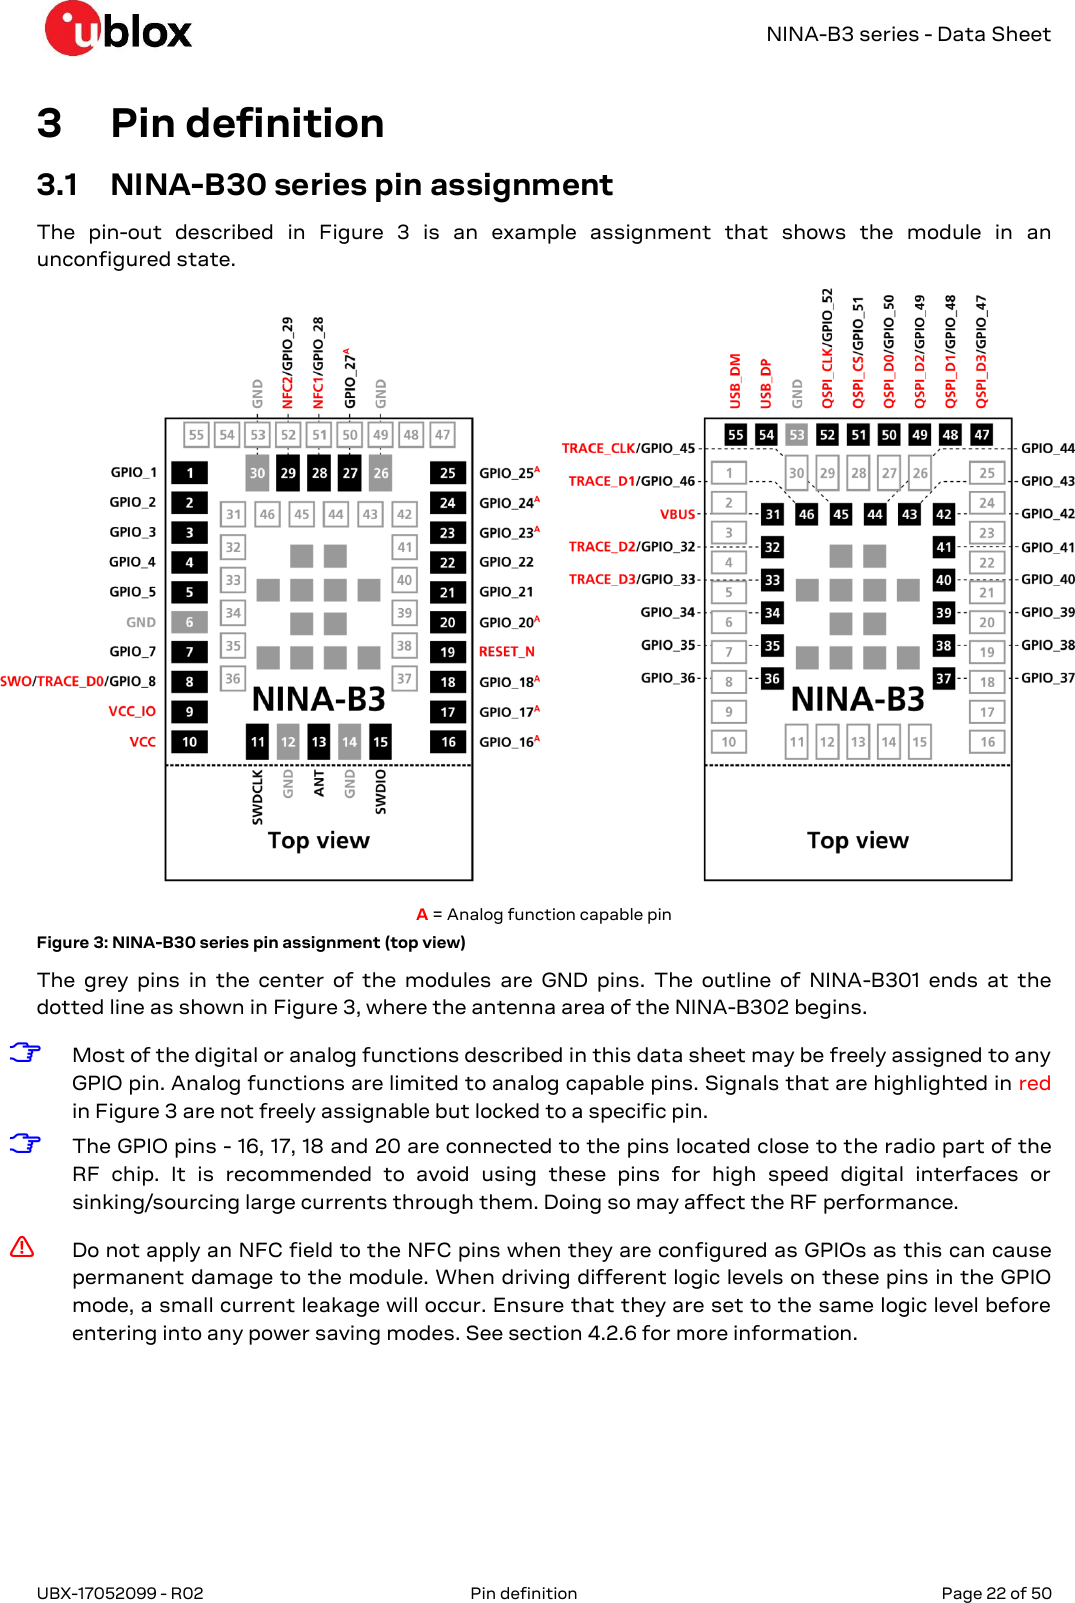  NINA-B3 series - Data Sheet UBX-17052099 - R02  Pin definition   Page 22 of 50      3 Pin definition 3.1 NINA-B30 series pin assignment  The  pin-out  described  in  Figure  3  is  an  example  assignment  that  shows  the  module  in  an unconfigured state.   A = Analog function capable pin Figure 3: NINA-B30 series pin assignment (top view) The  grey  pins  in  the center  of  the  modules  are  GND  pins.  The  outline  of  NINA-B301  ends  at  the dotted line as shown in Figure 3, where the antenna area of the NINA-B302 begins. ☞ Most of the digital or analog functions described in this data sheet may be freely assigned to any GPIO pin. Analog functions are limited to analog capable pins. Signals that are highlighted in red in Figure 3 are not freely assignable but locked to a specific pin. ☞ The GPIO pins - 16, 17, 18 and 20 are connected to the pins located close to the radio part of the RF  chip.  It  is  recommended  to  avoid  using  these  pins  for  high  speed  digital  interfaces  or sinking/sourcing large currents through them. Doing so may affect the RF performance. ⚠ Do not apply an NFC field to the NFC pins when they are configured as GPIOs as this can cause permanent damage to the module. When driving different logic levels on these pins in the GPIO mode, a small current leakage will occur. Ensure that they are set to the same logic level before entering into any power saving modes. See section 4.2.6 for more information. 